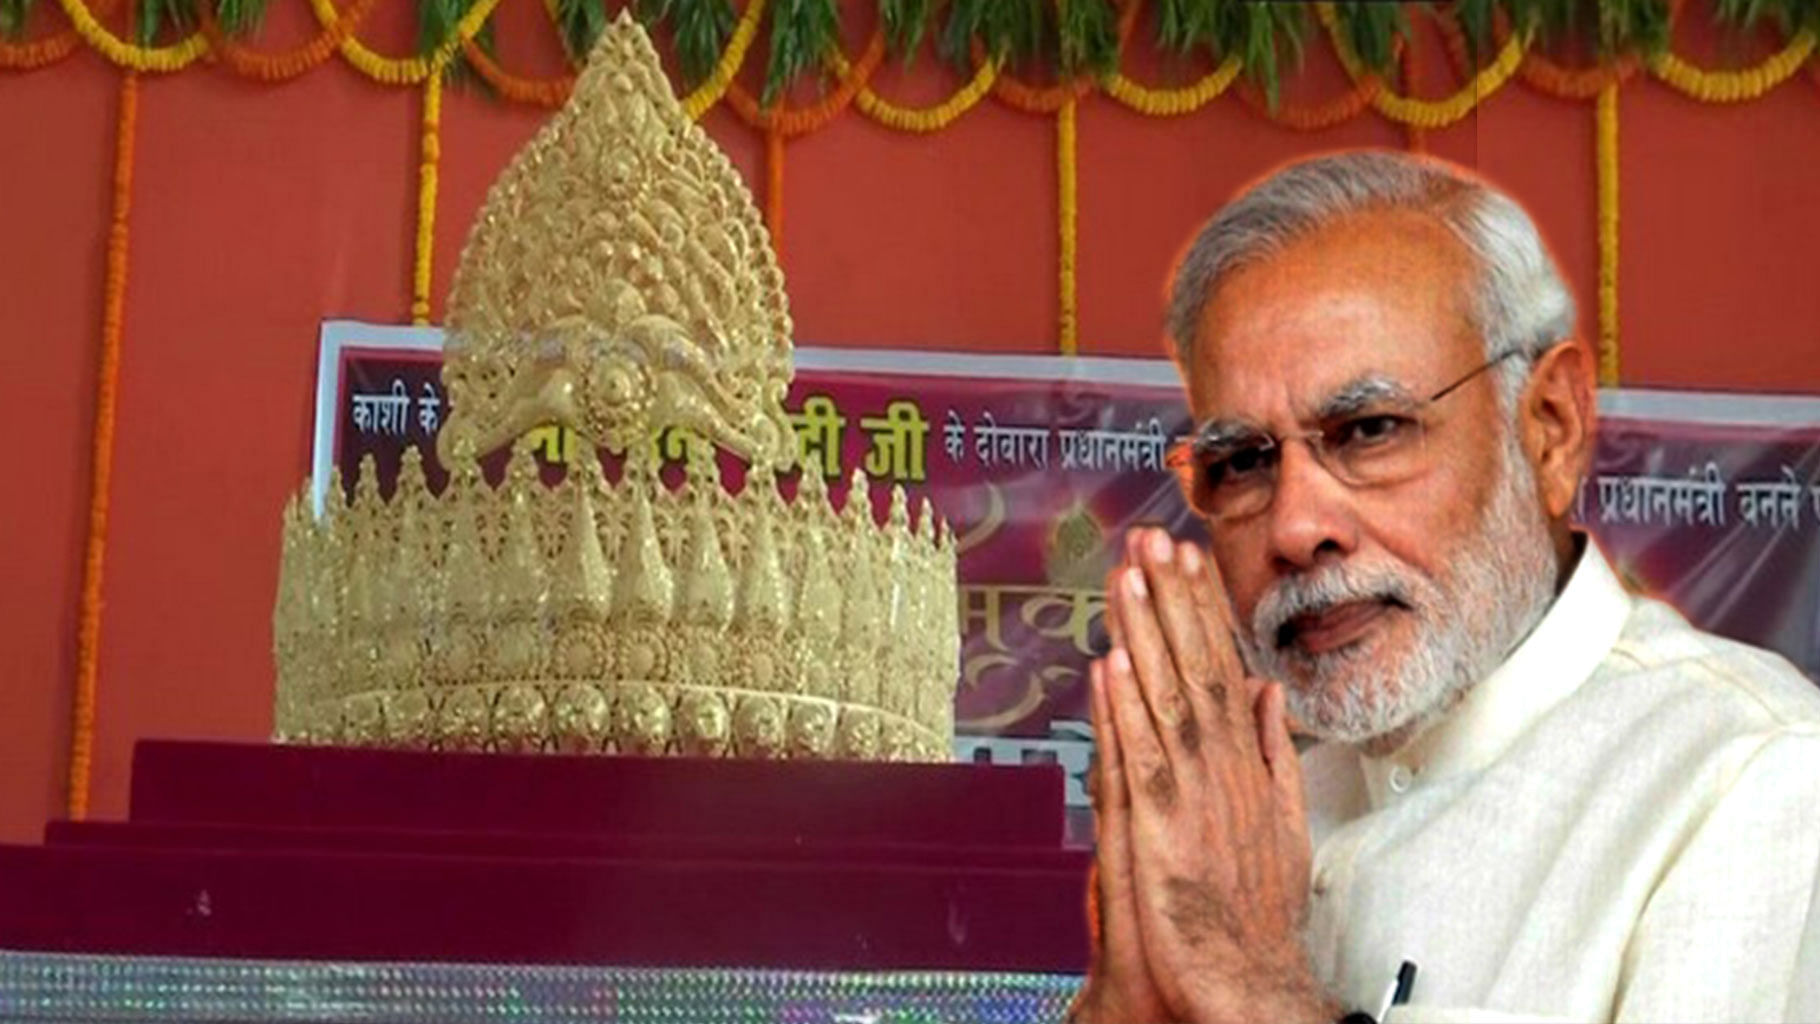 A man offered a gold crown on PM Modi’s birthday.